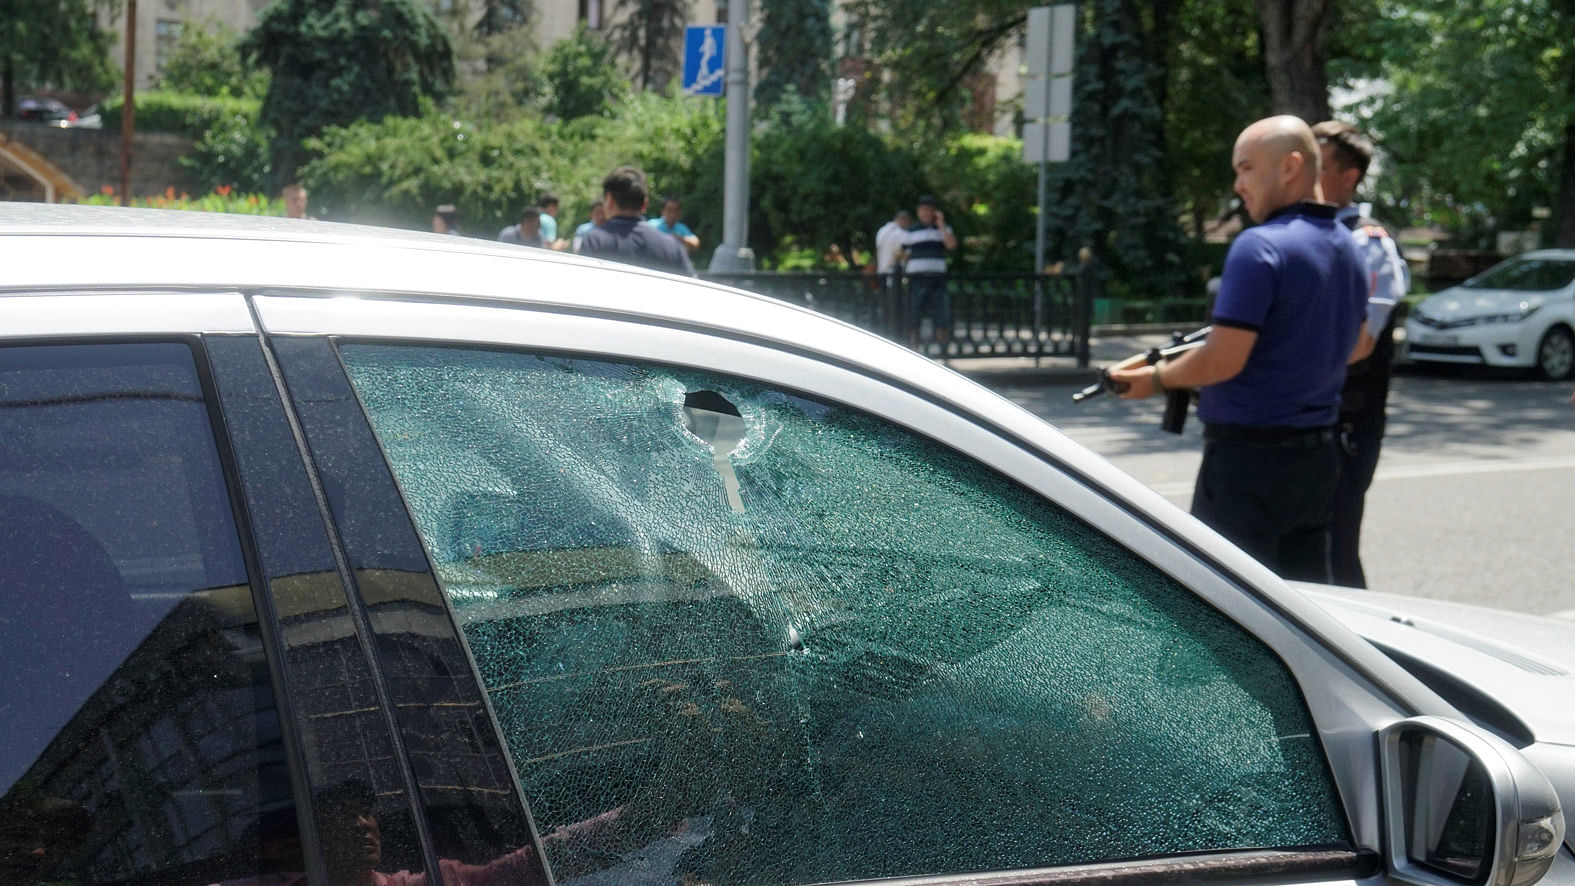 A bullet hole is seen on the window of a car parked in the street in Almaty, Kazakhstan. (Photo: Reuters) 